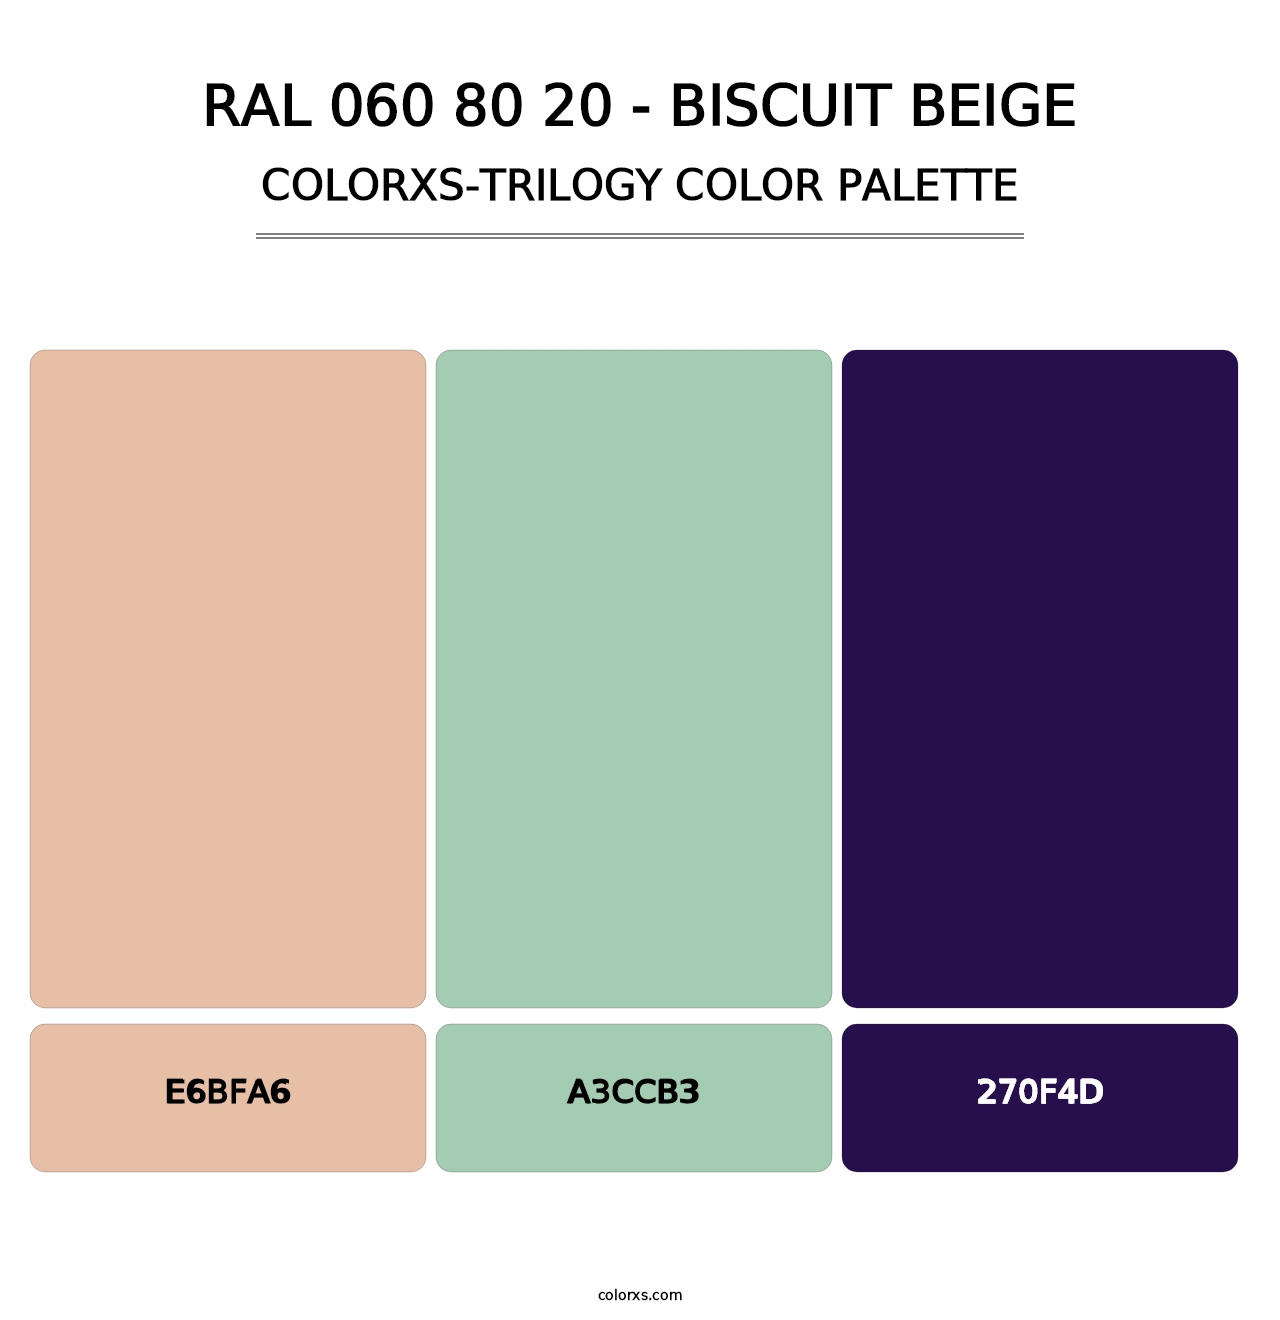 RAL 060 80 20 - Biscuit Beige - Colorxs Trilogy Palette